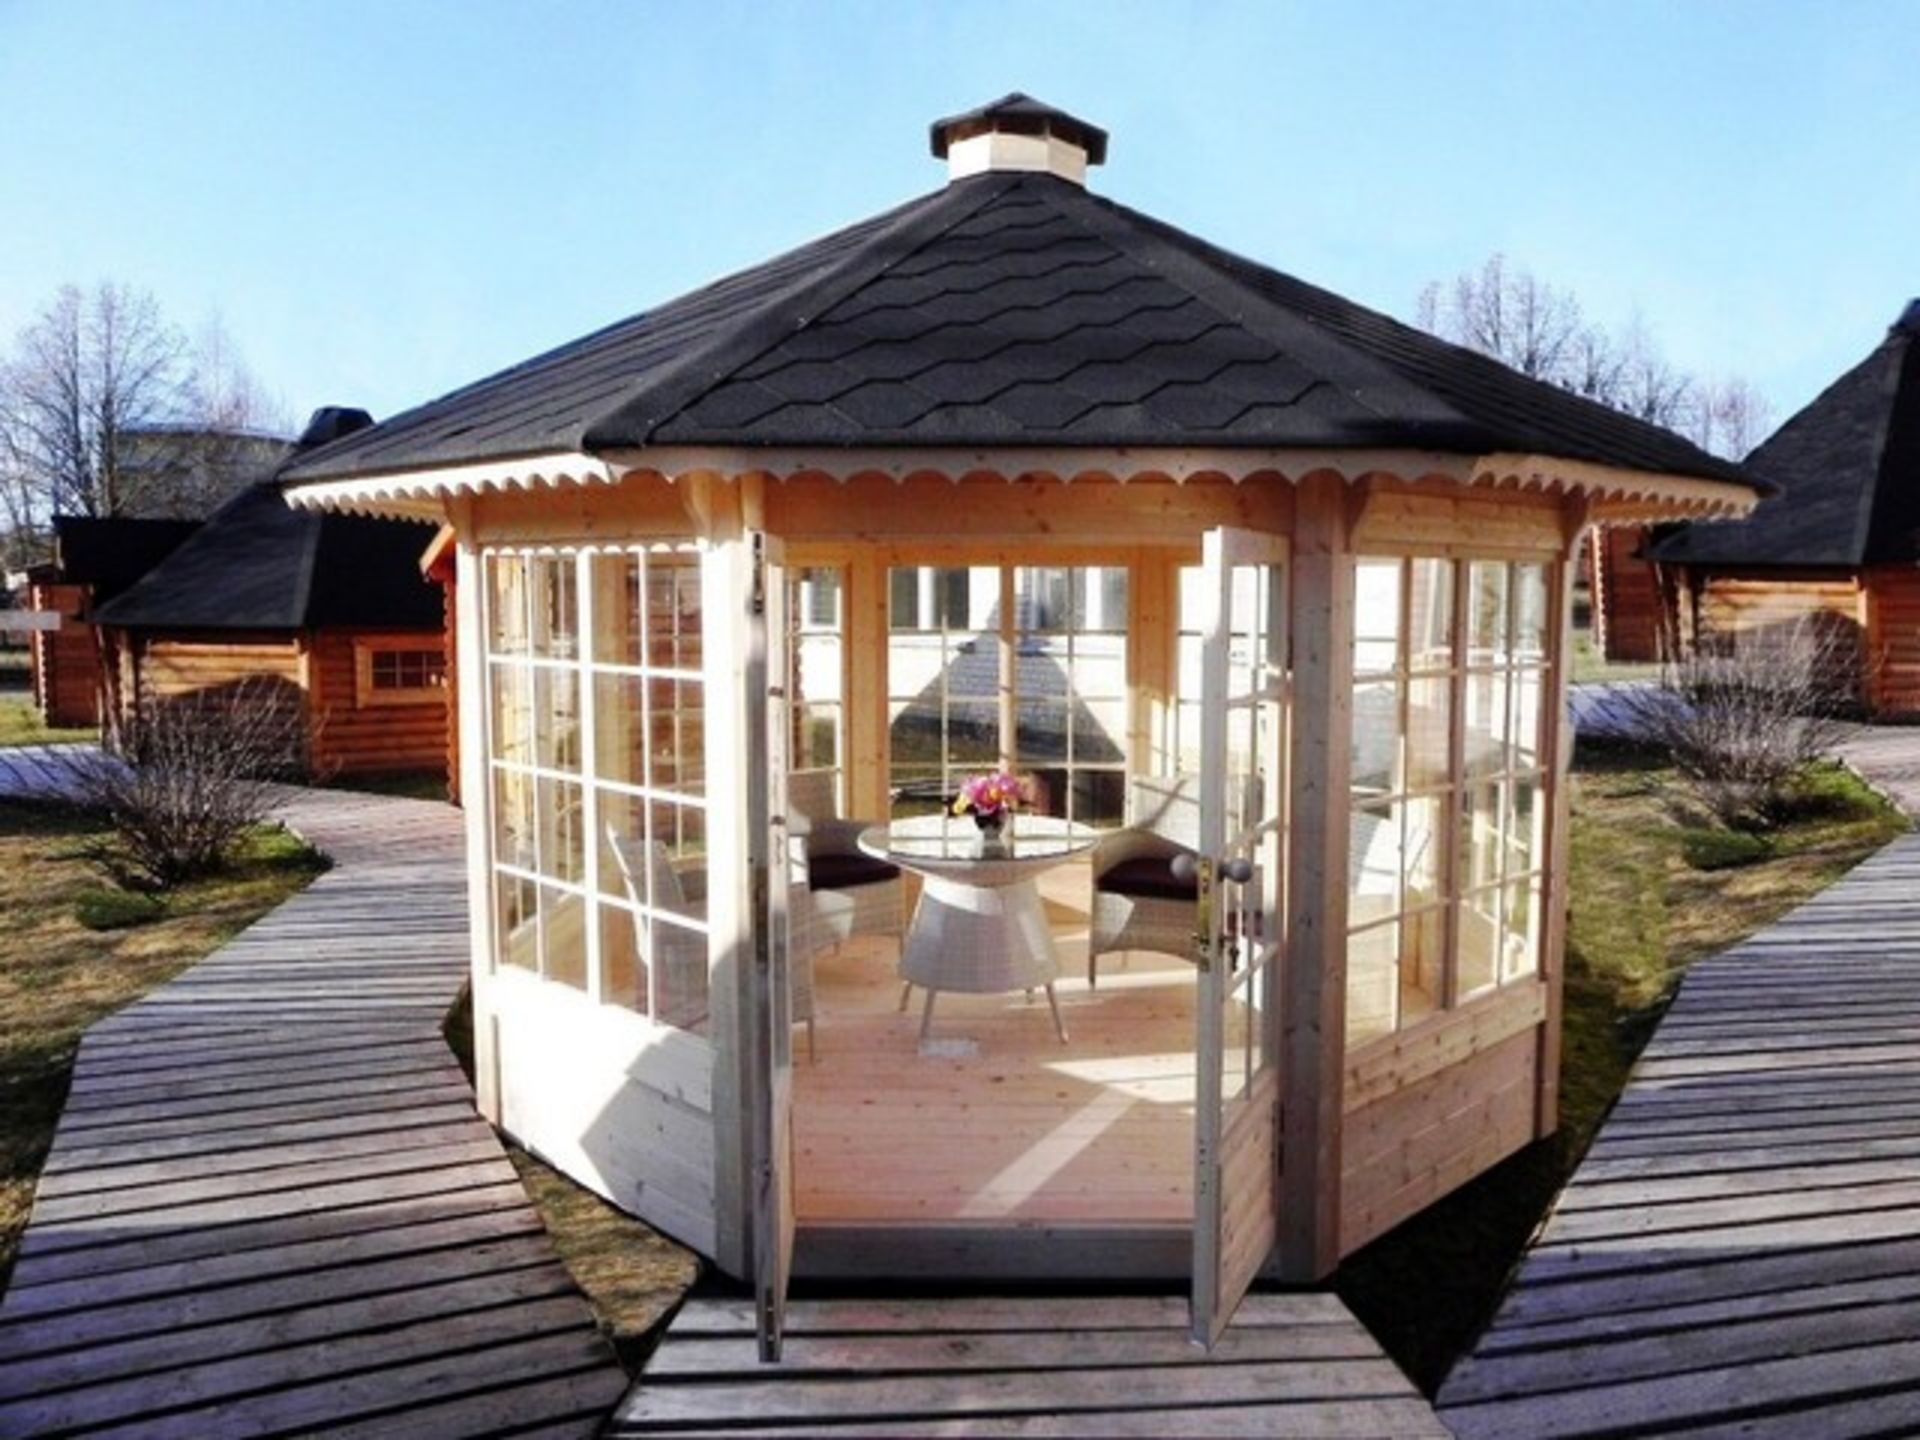 V Brand New 10m sq 8 Corner Pavillion - 7 Double Glass Windows (3 Opening) - Double Doors With